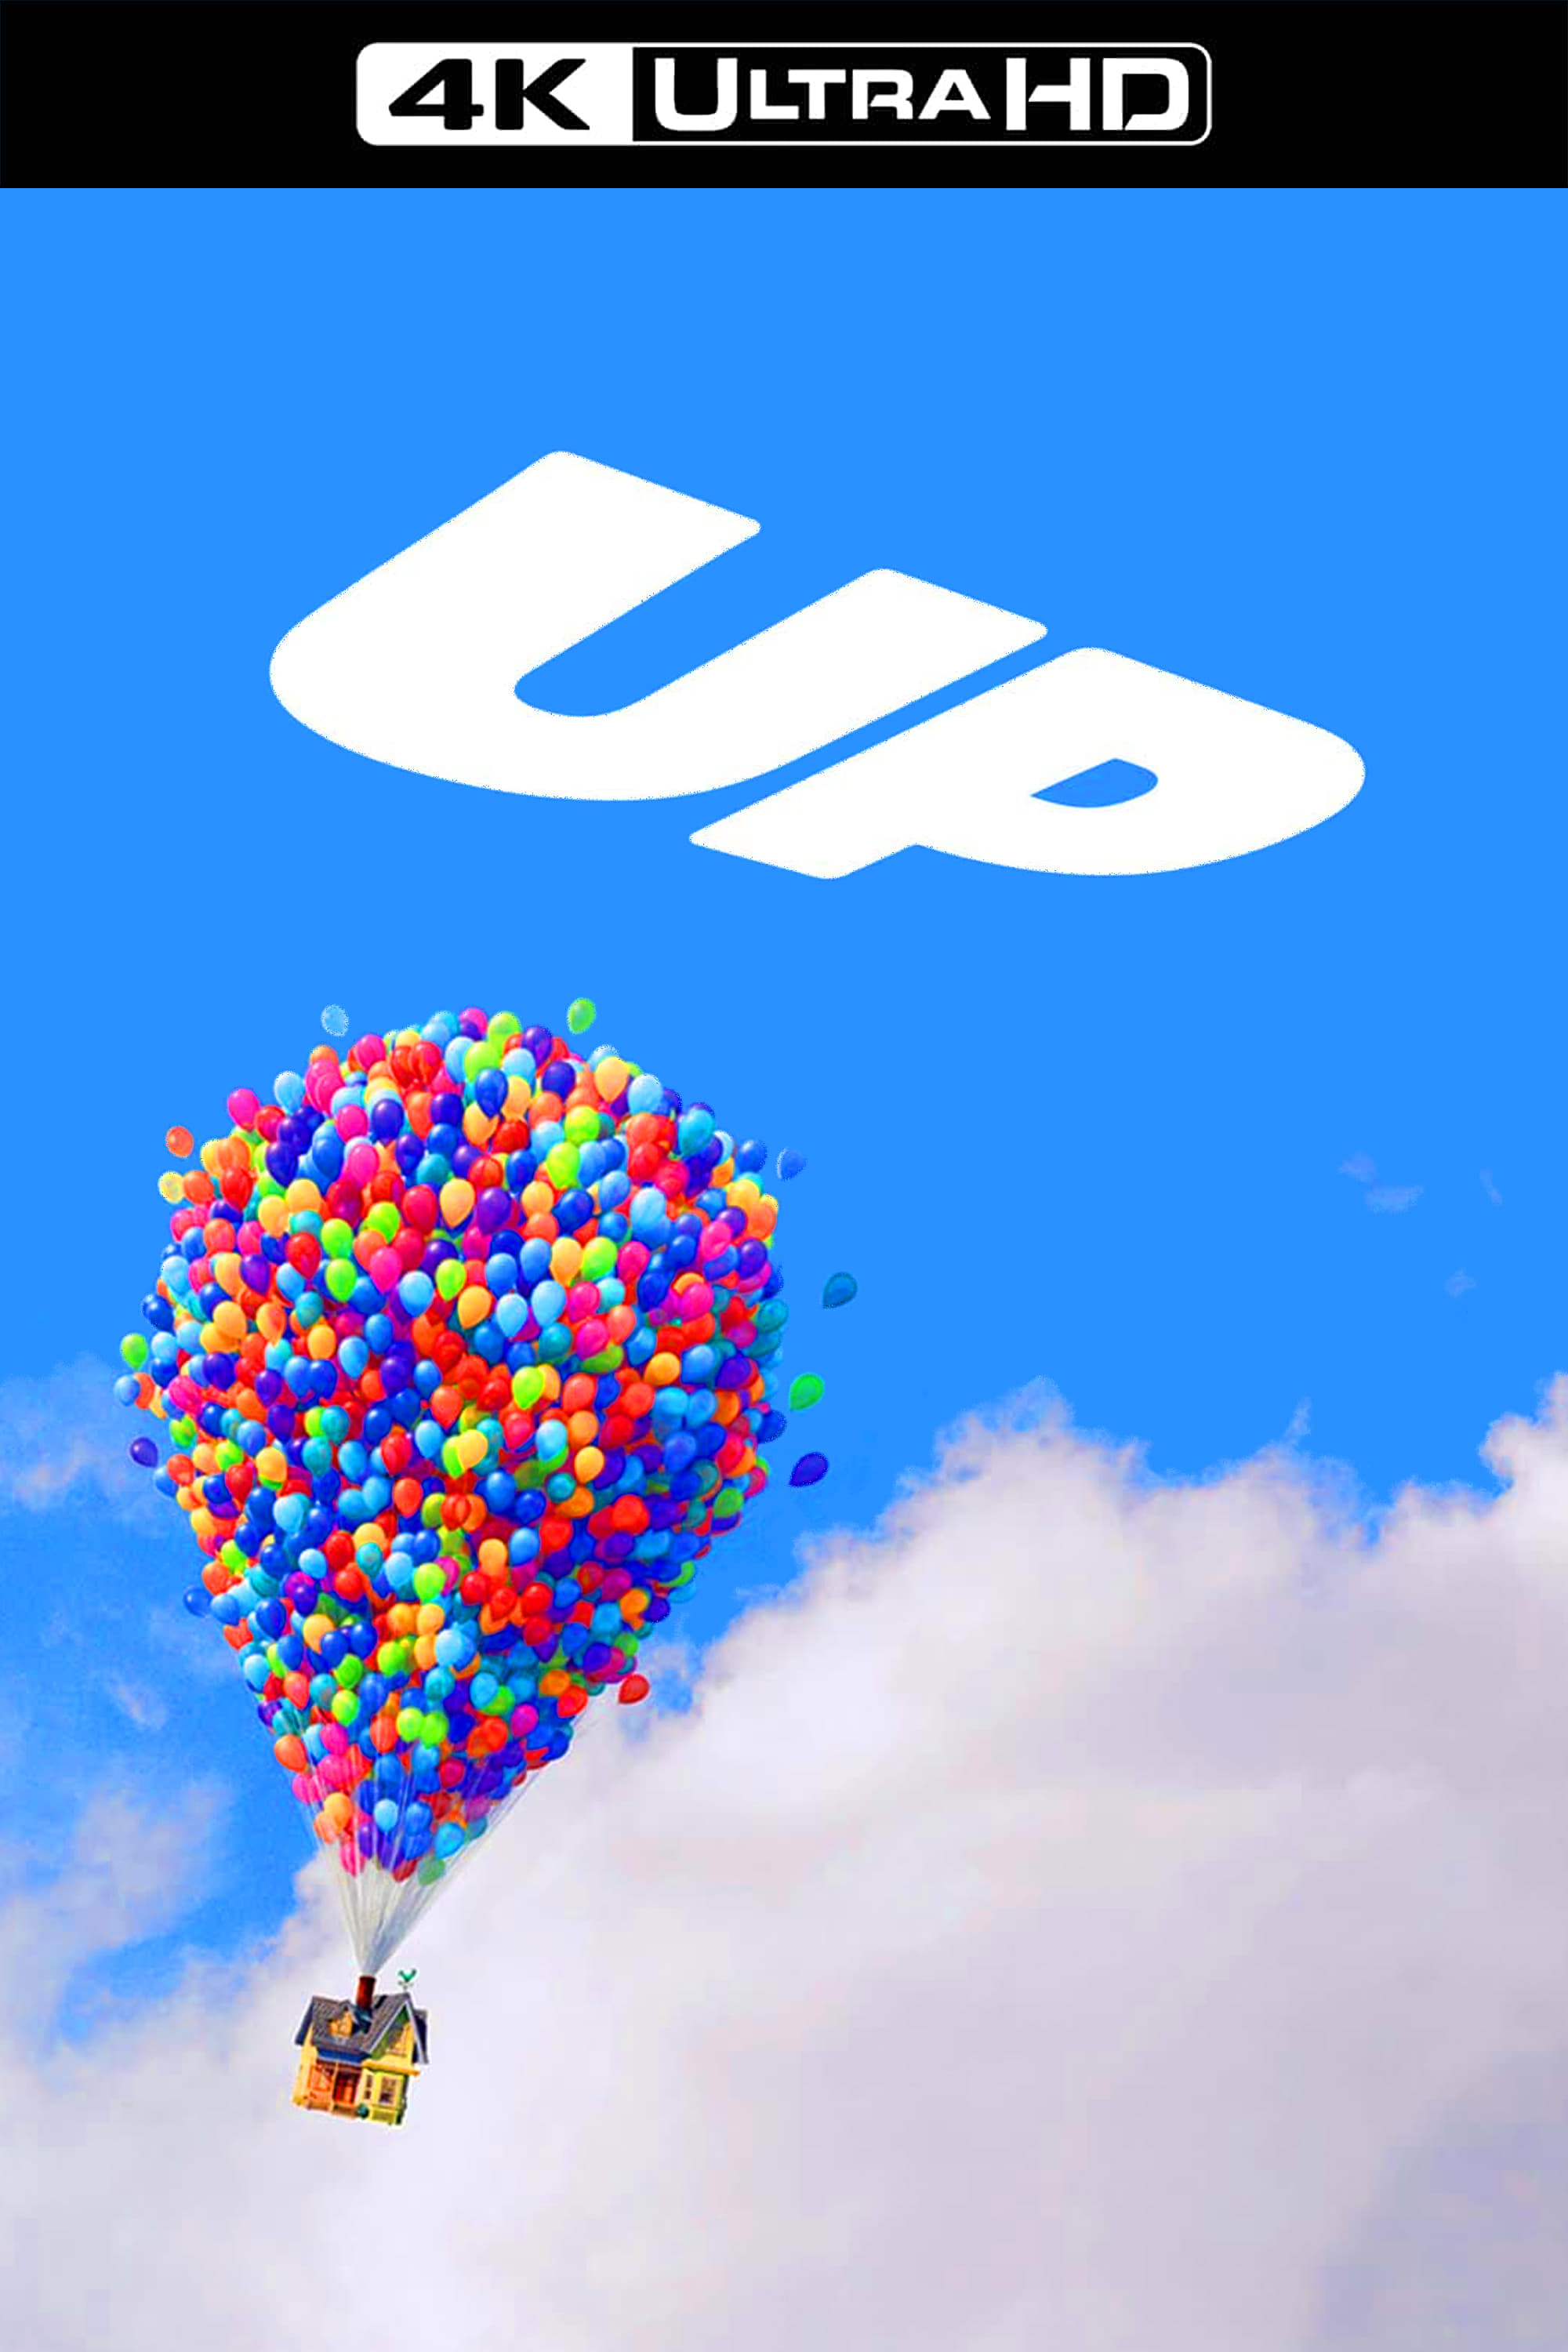 Up POSTER